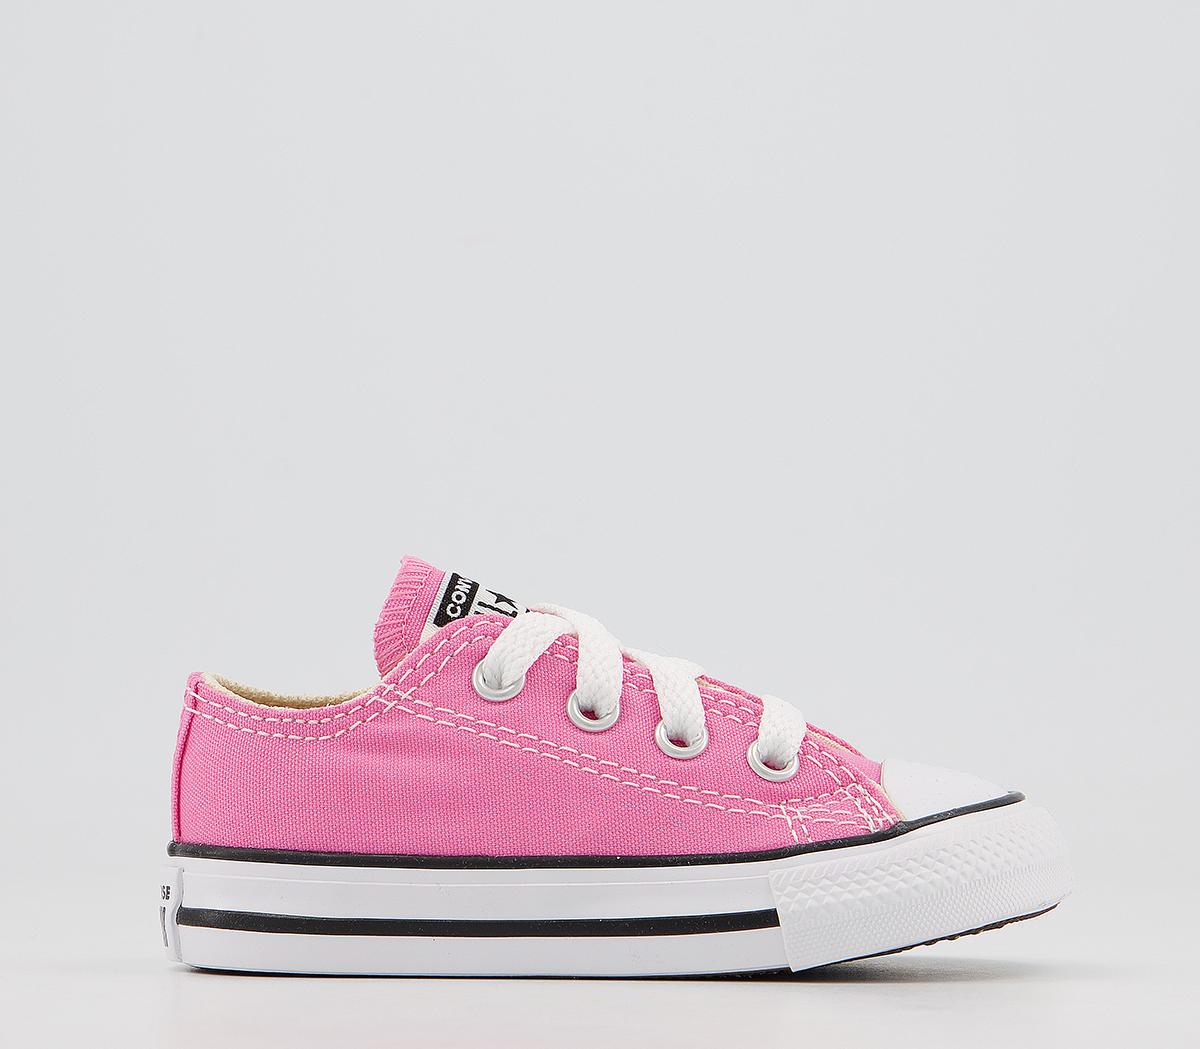 pink converse for toddlers